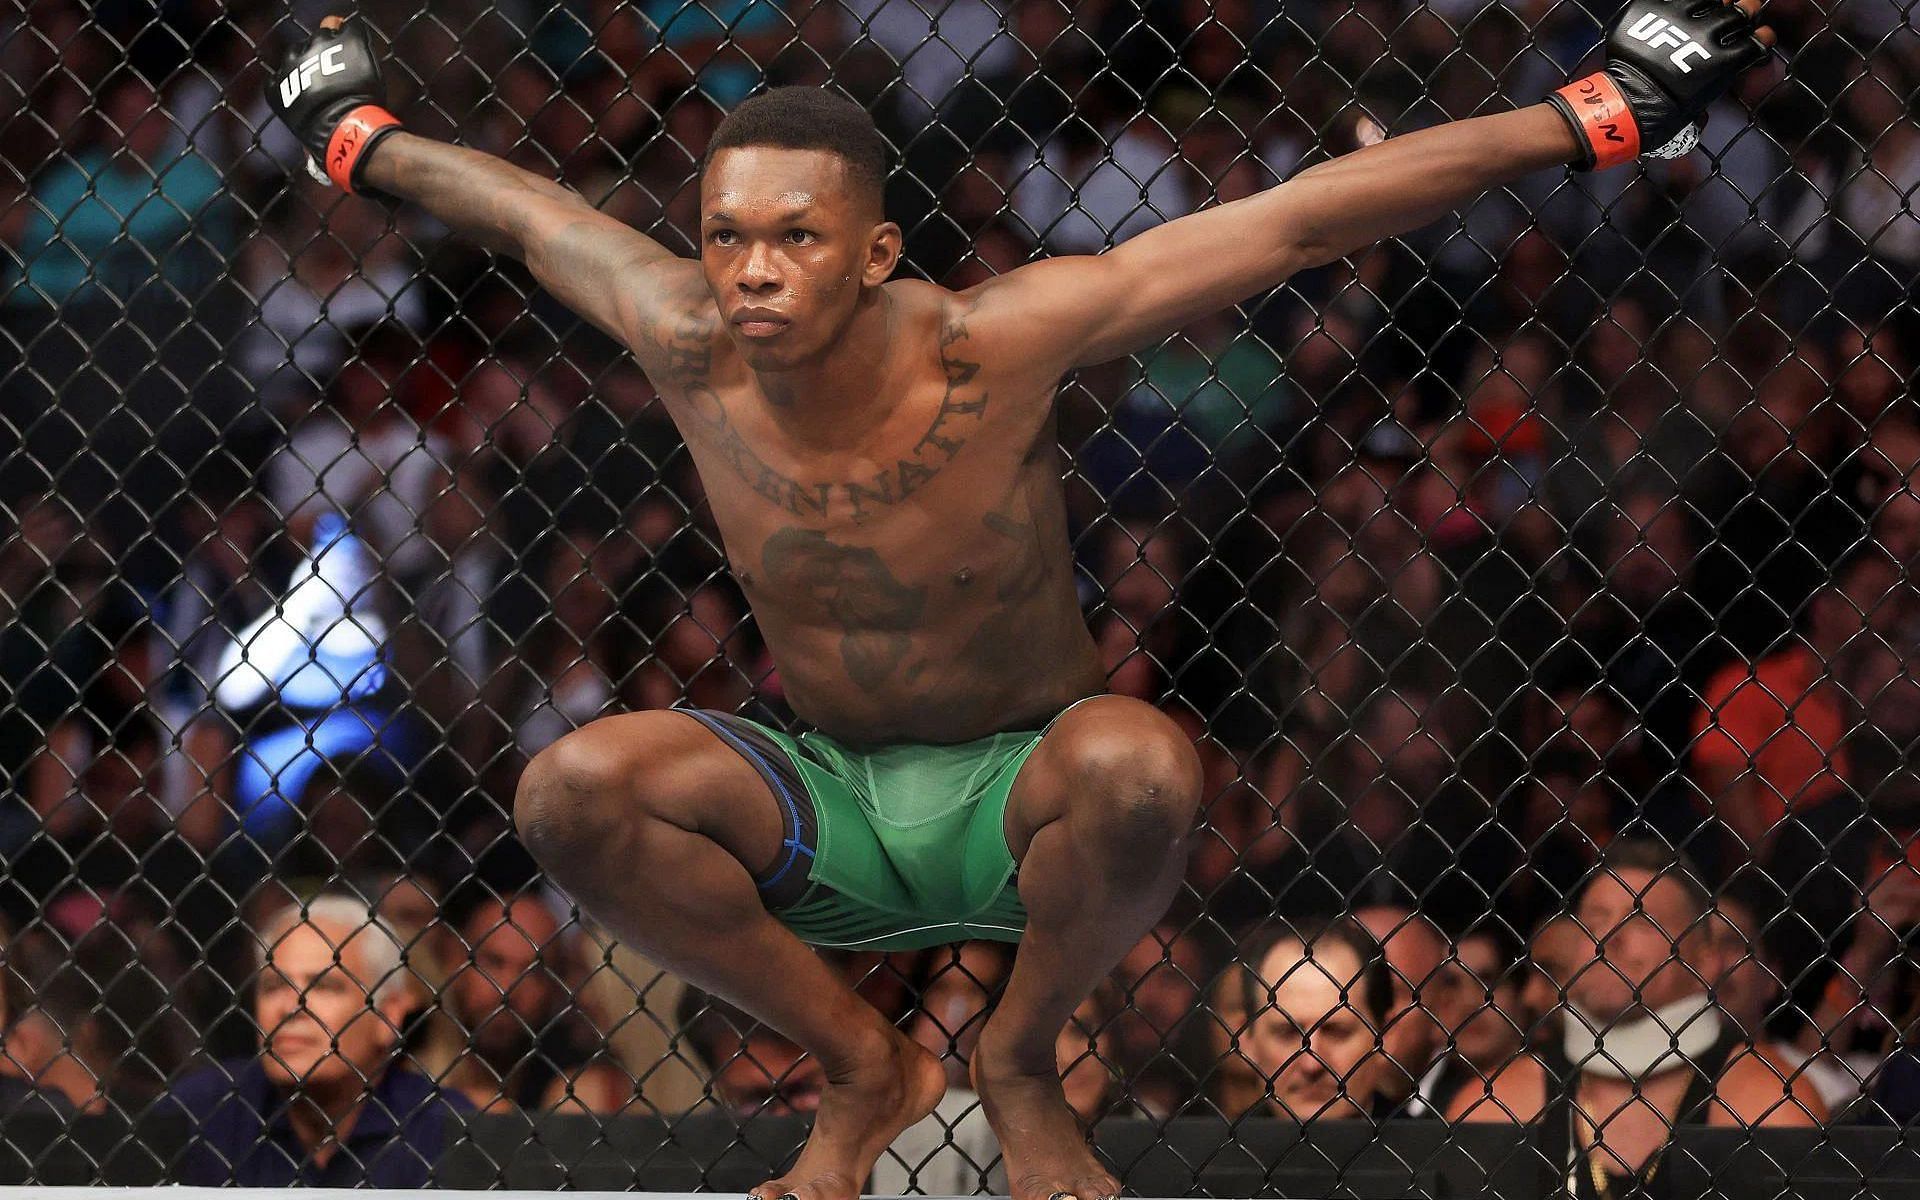 Israel Adesanya weighs in on the viral news of a missing teenager